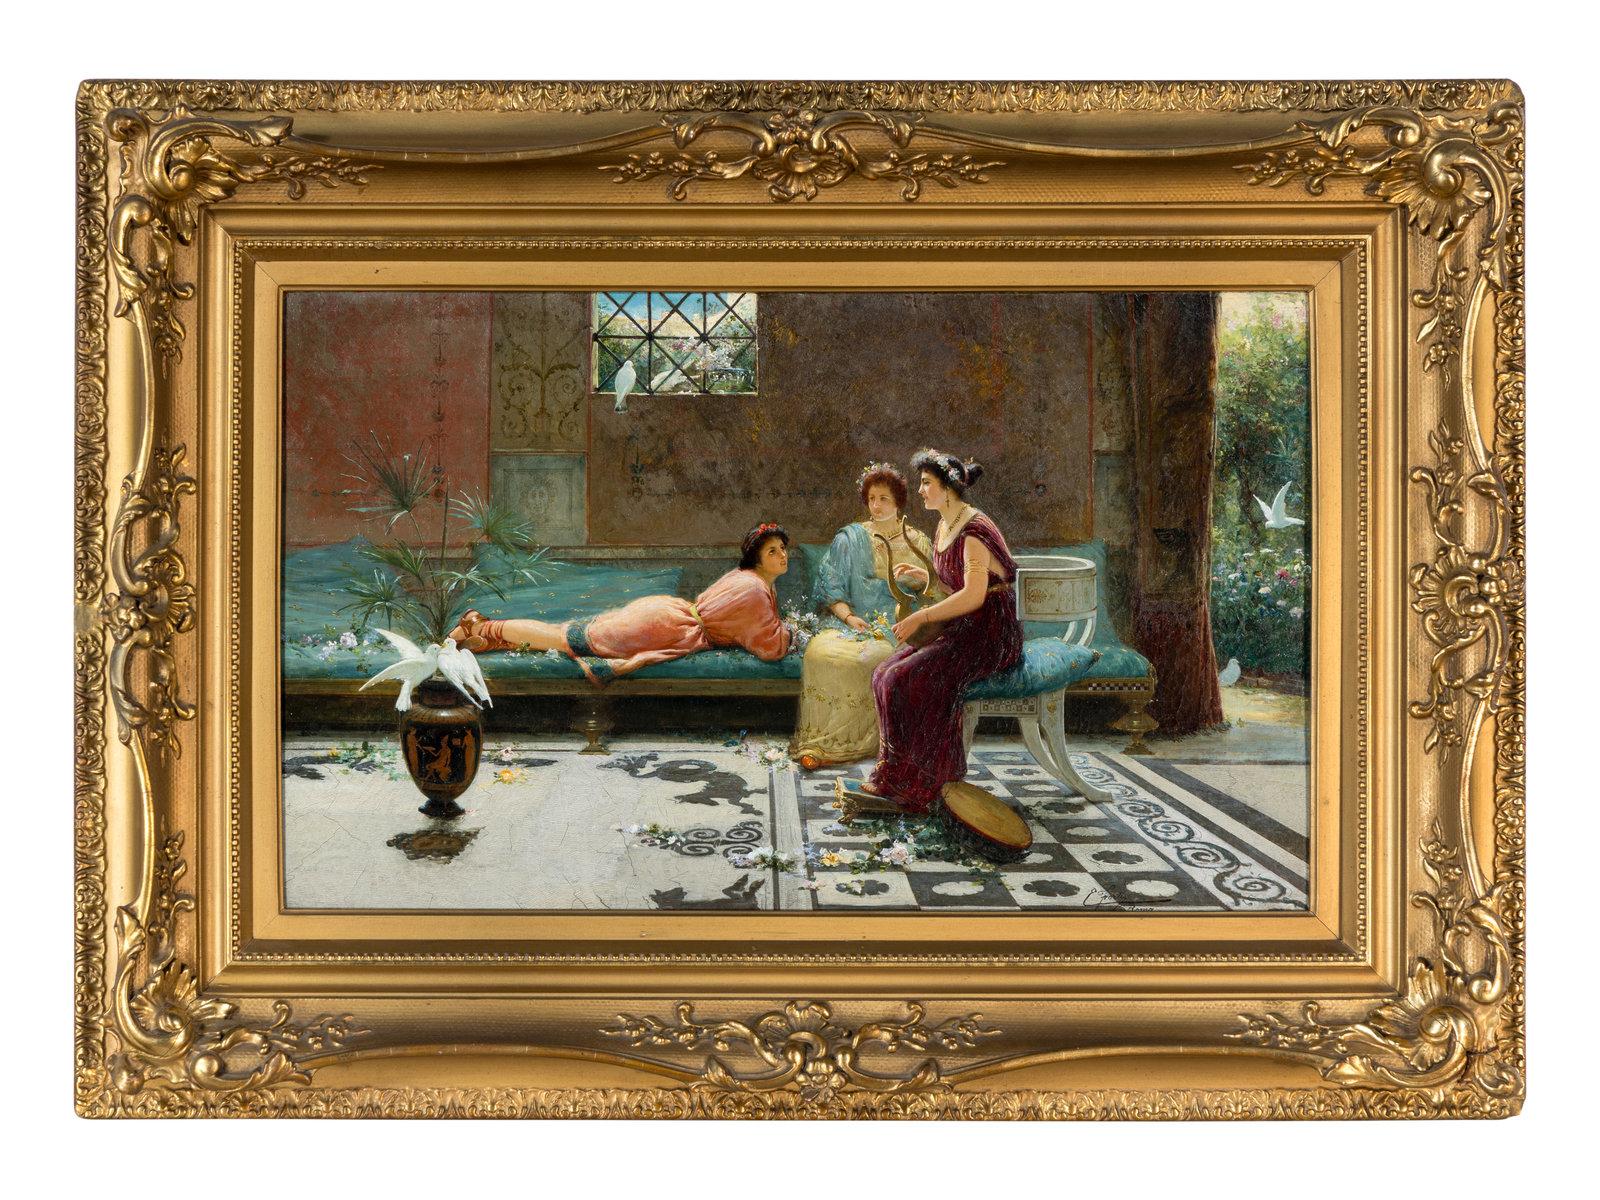 Edoardo Ettore Forti Figurative Painting - "A Pompeiian Love Song" 19th Century Realism Antique Oil on Canvas